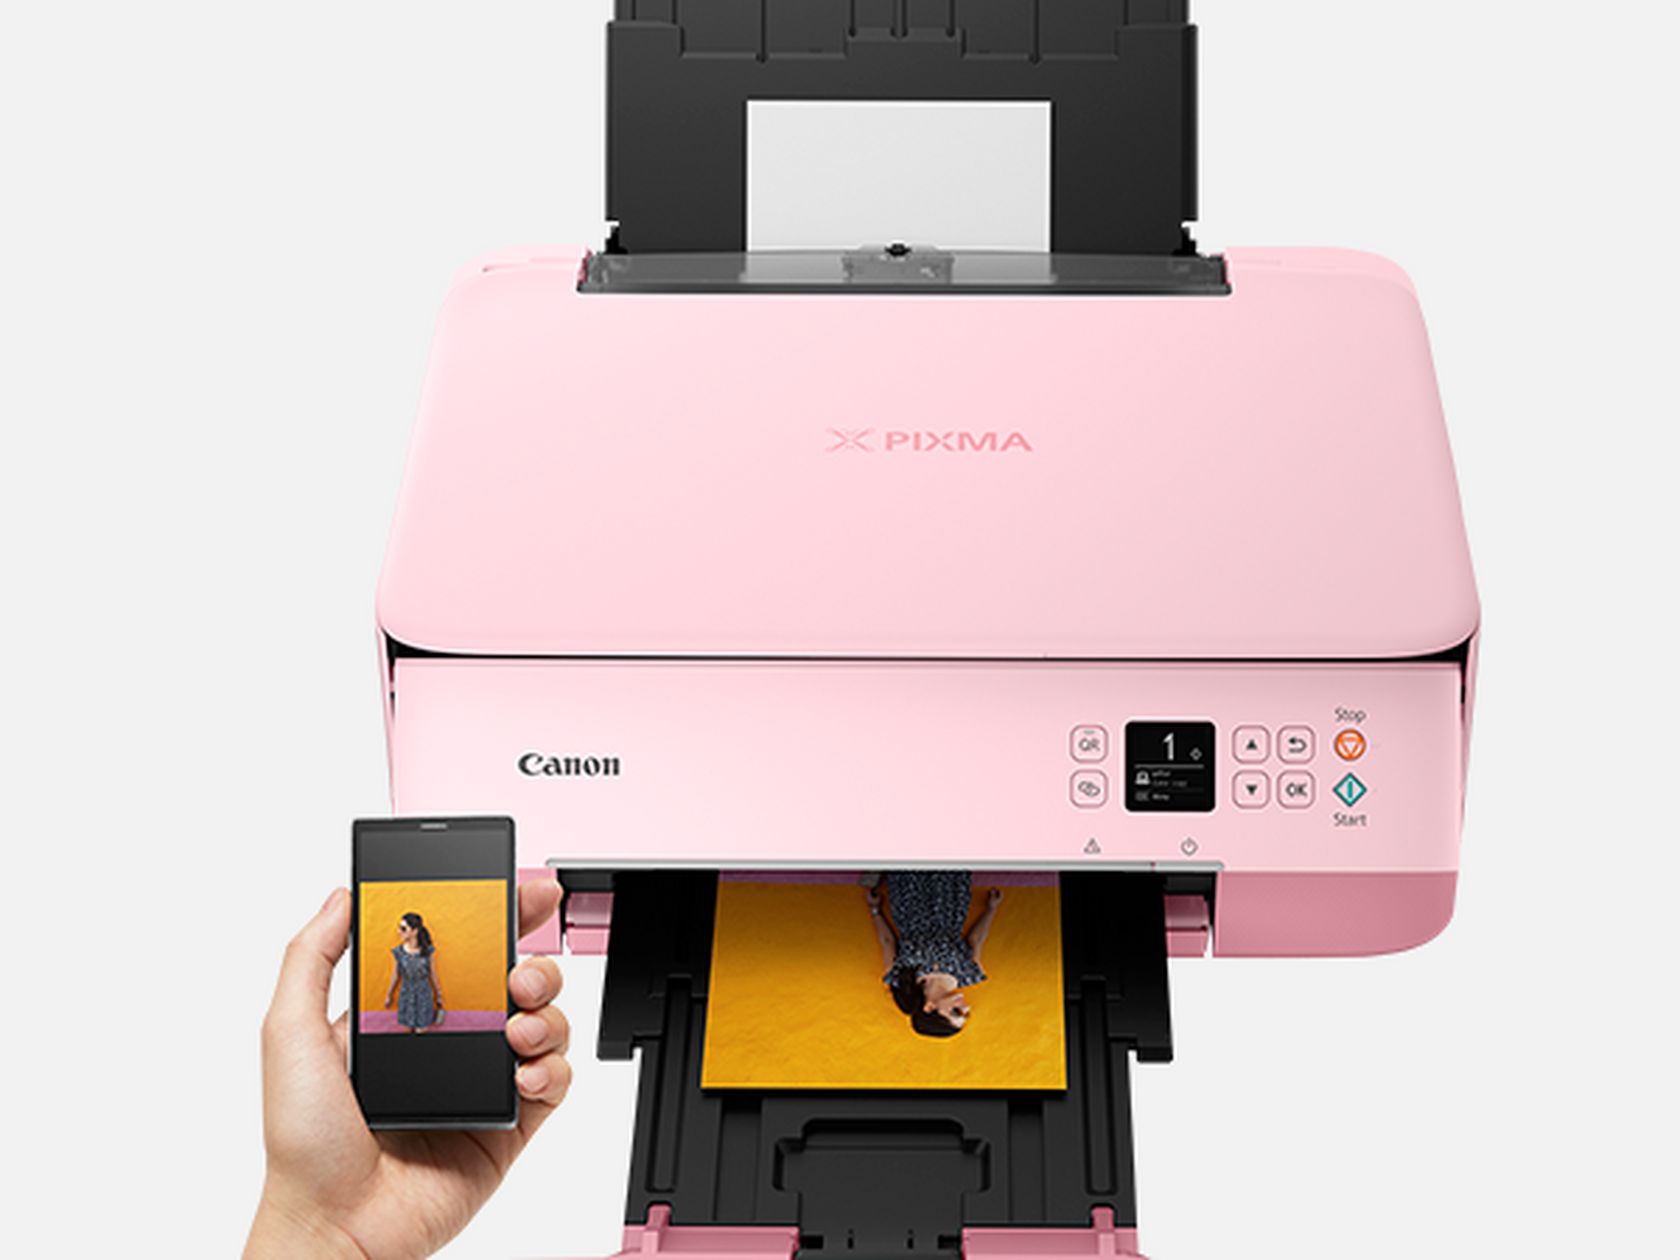 Specifications & Features - PIXMA TS5350 Series - Canon Europe